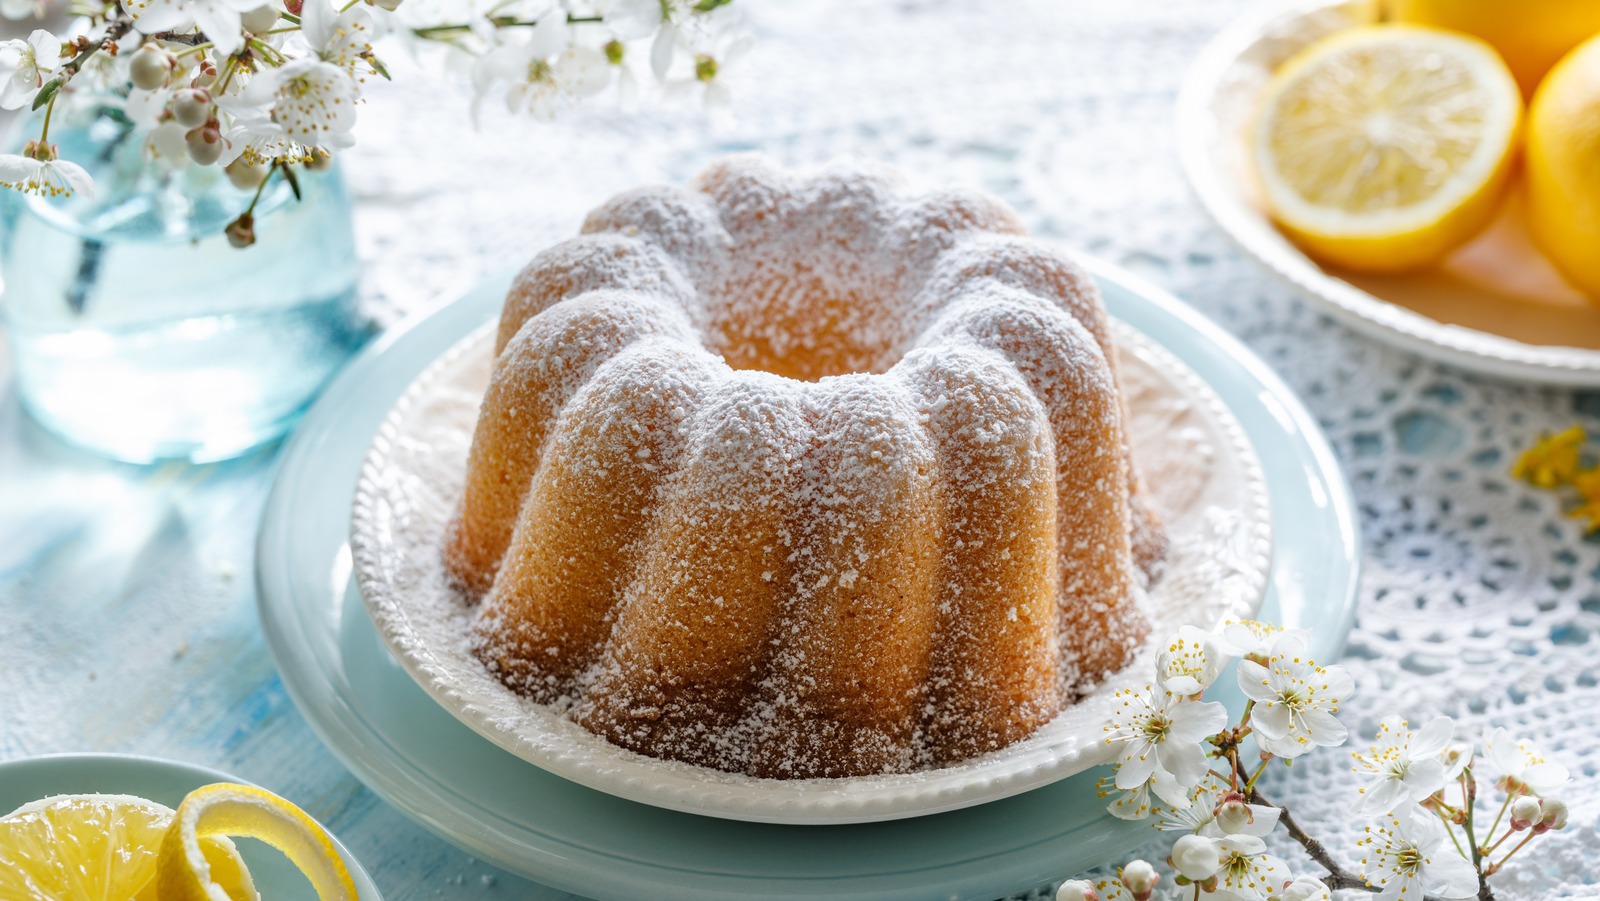 https://www.thedailymeal.com/img/gallery/why-you-should-grease-your-bundt-cake-pan-with-shortening-not-butter/l-intro-1692968386.jpg